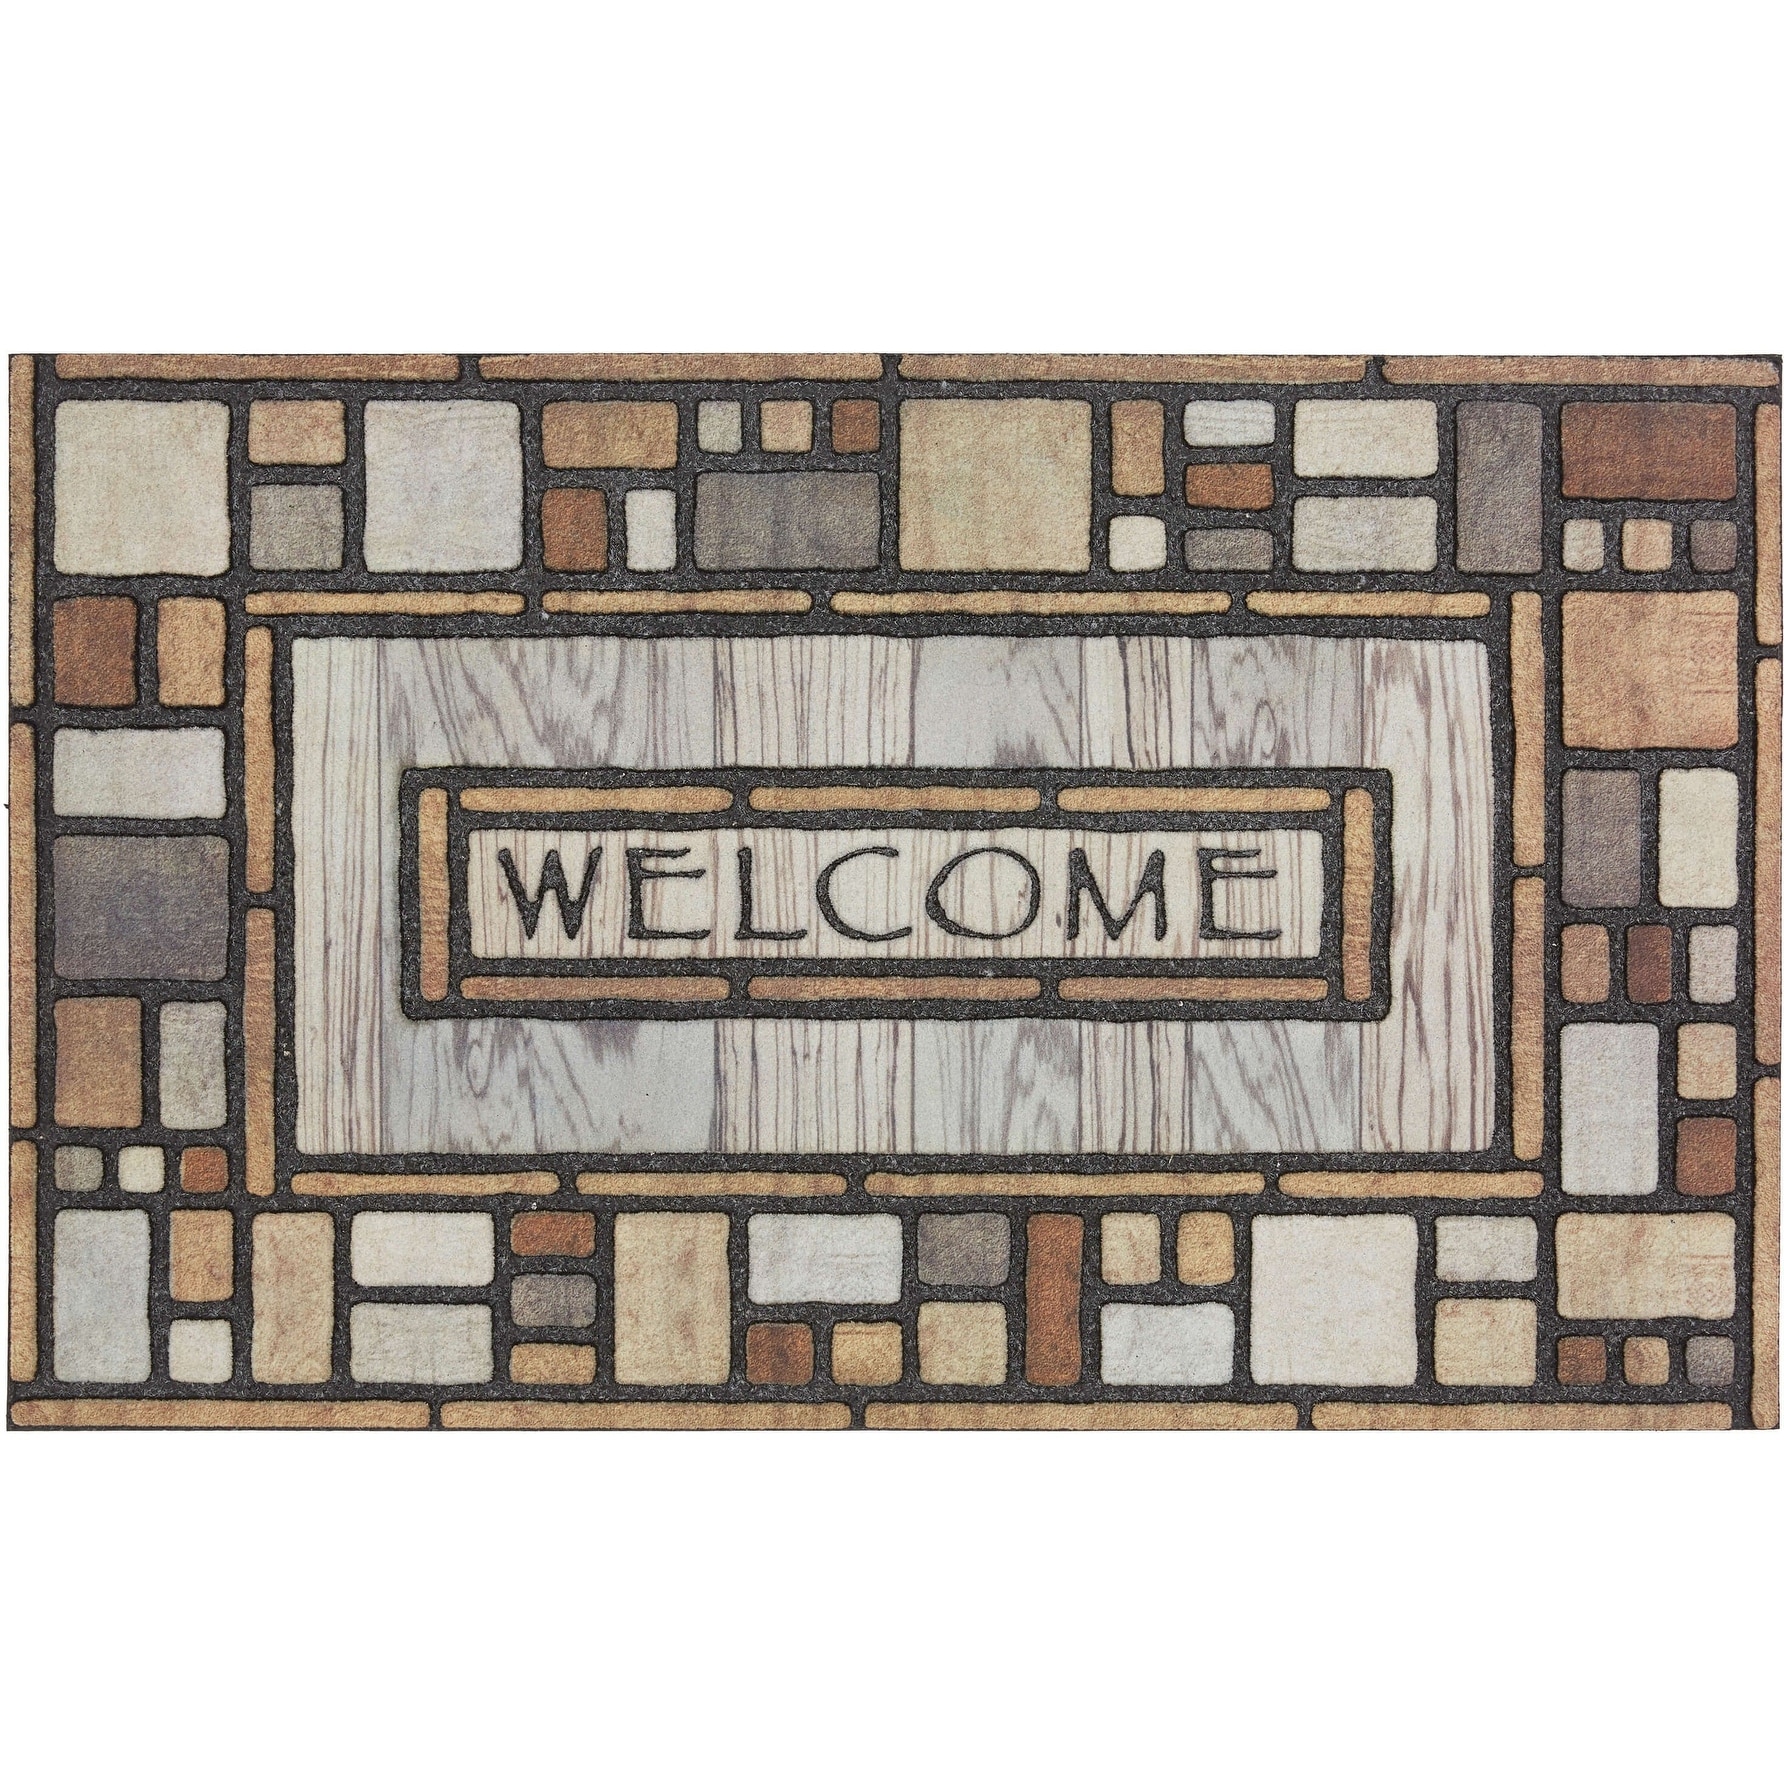 https://ak1.ostkcdn.com/images/products/is/images/direct/10585b8eb7fe249a91e4ea21608fe0b68370157e/Mohawk-Home-Doorscapes-Welcome-Drifted-Nature-Door-Mat.jpg